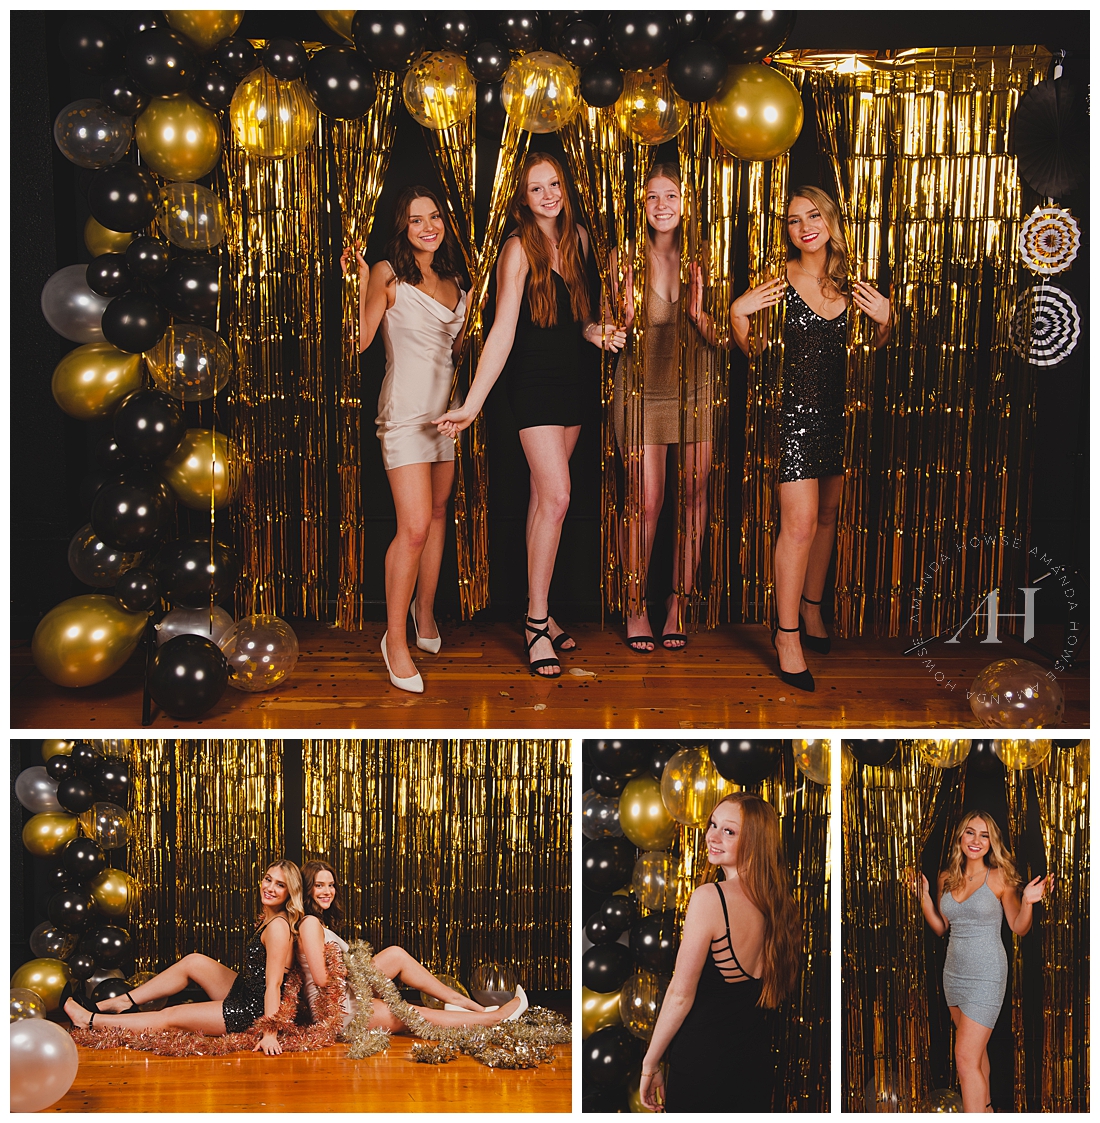 Black, Gold, and White Themed NYE Party Decor | Outfit Ideas for New Year's Eve | Photographed by the Best Tacoma Senior Photographer Amanda Howse